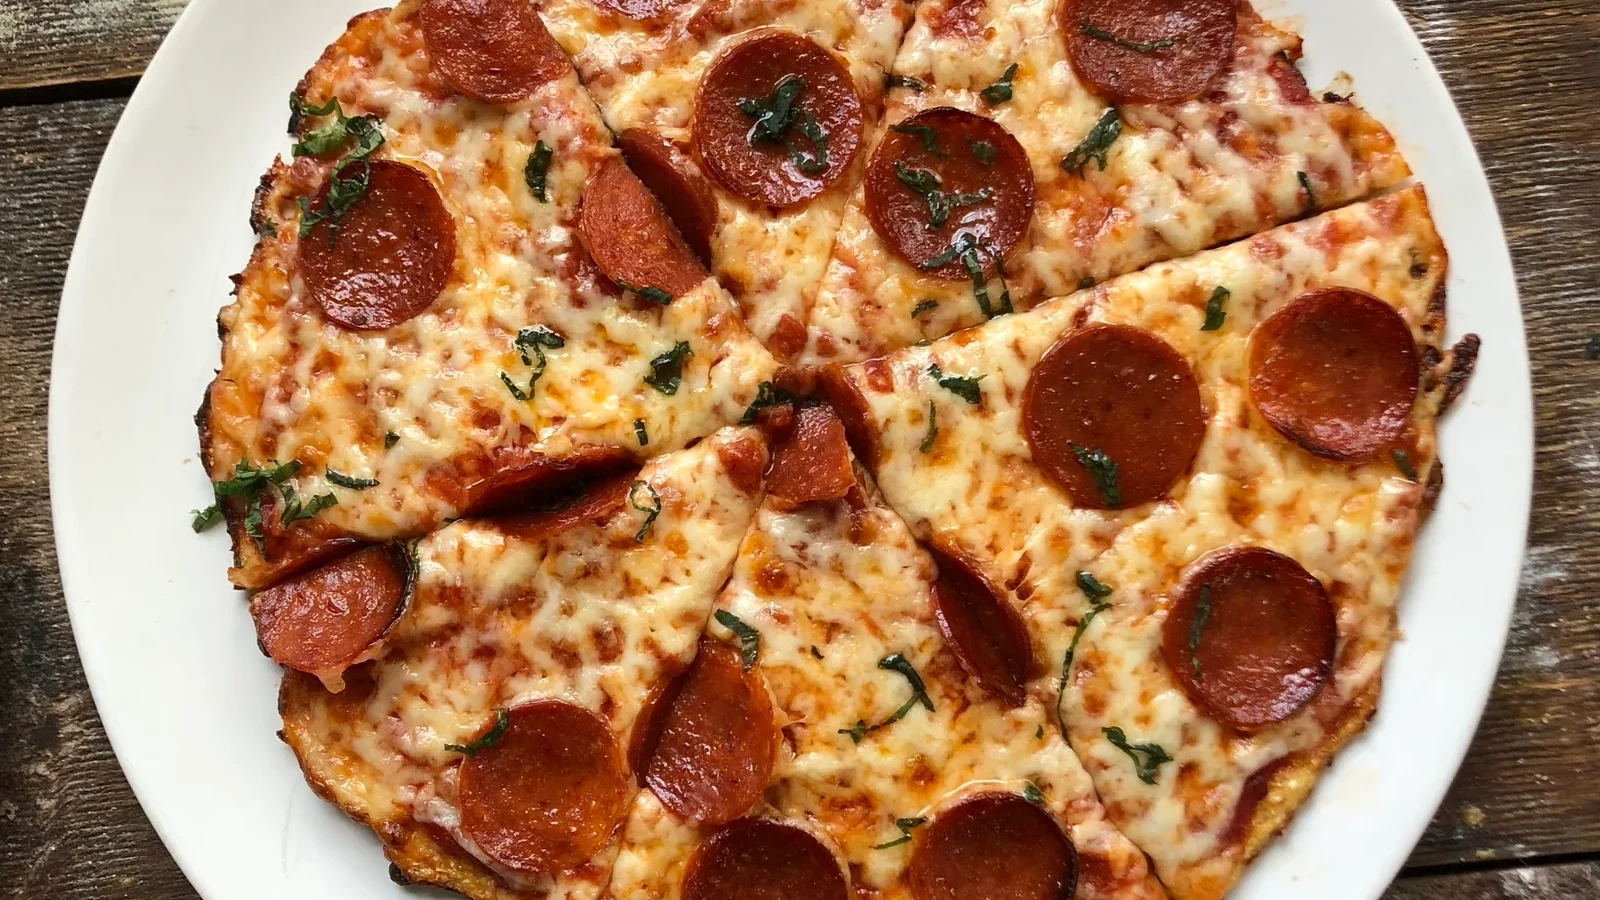 Image of Cauliflower Pizza with Pepperoni